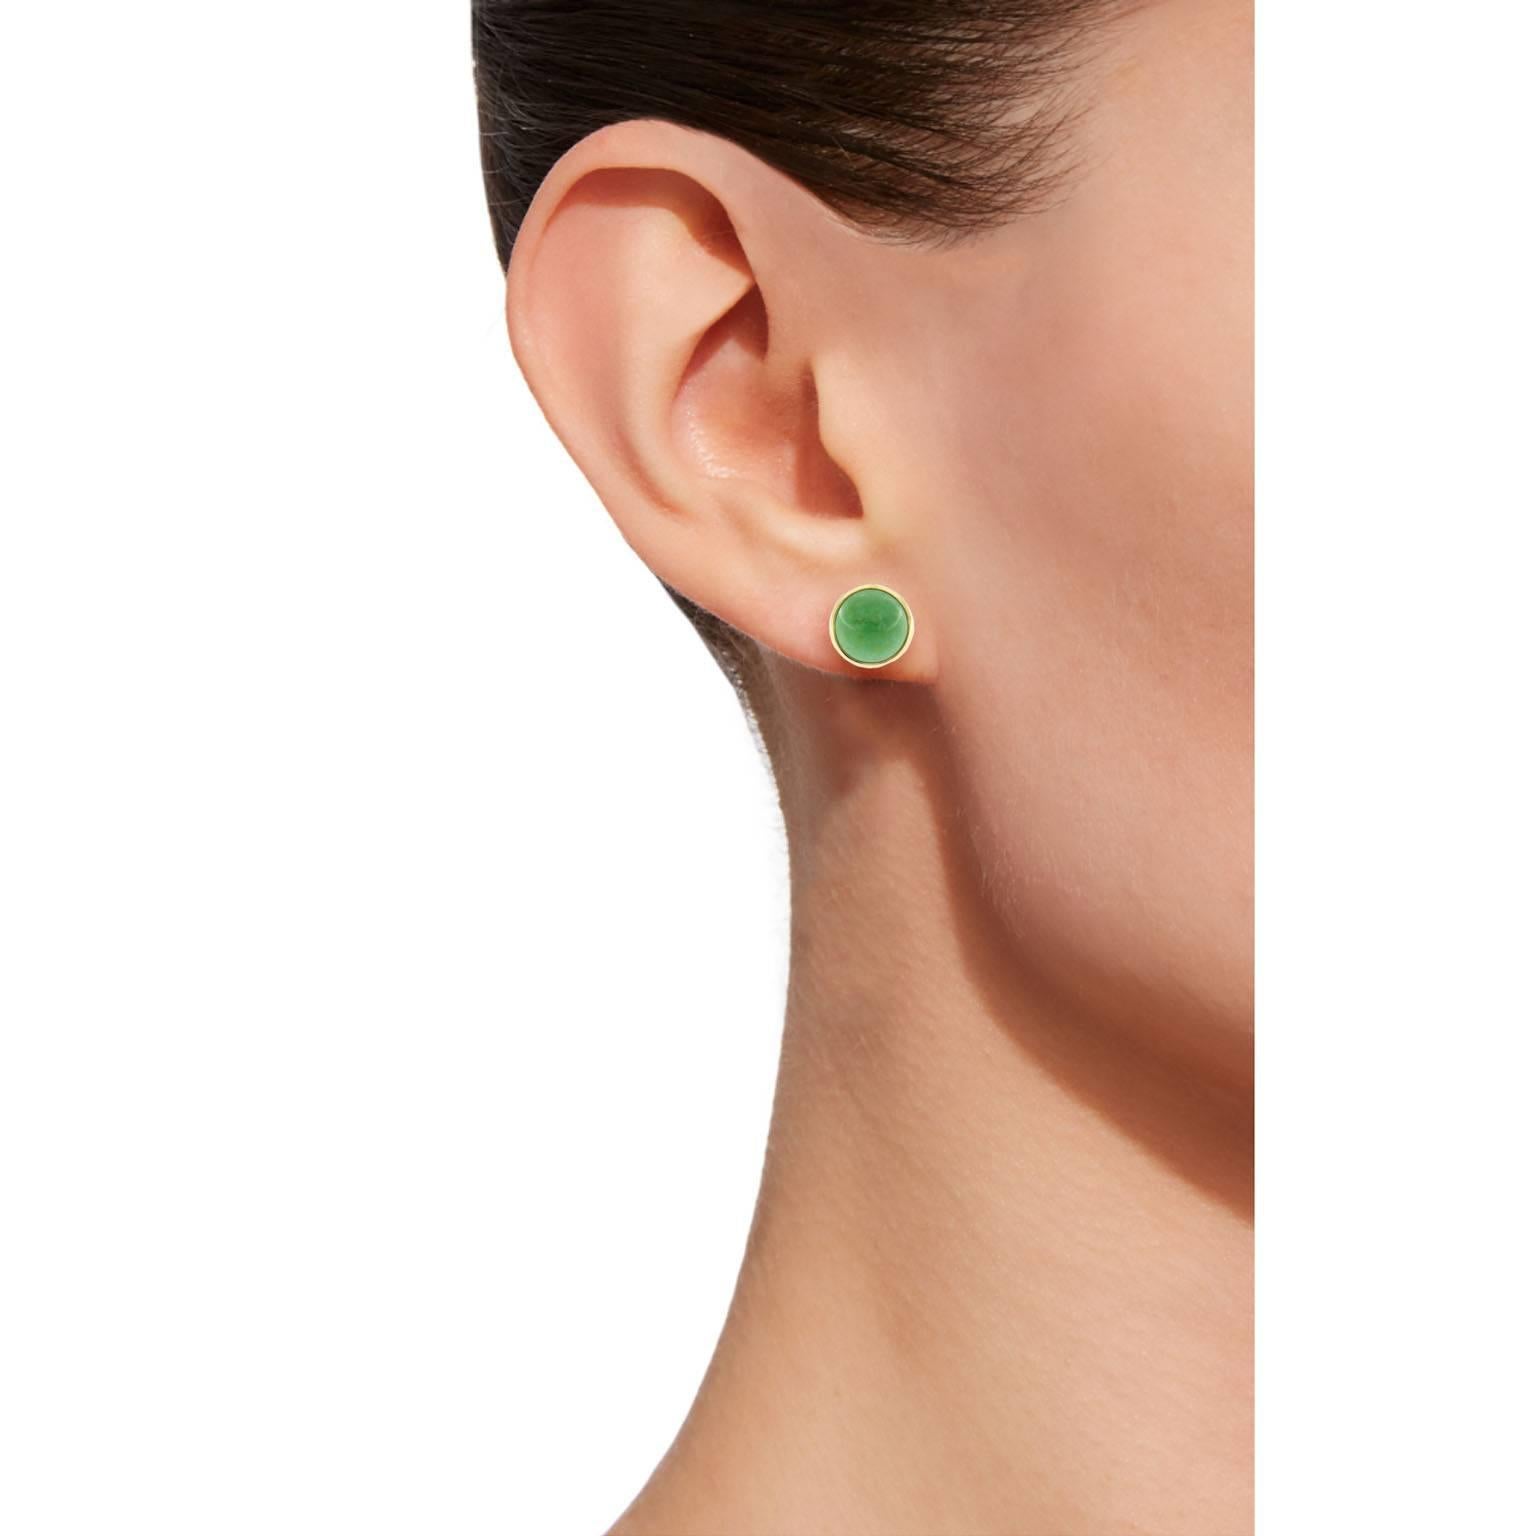 Jona design collection, hand crafted in Italy, 18 Karat yellow gold, Quartz over Burmese Jade cabochon stud earrings, weighing 10.15 carats. 

All Jona jewelry is new and has never been previously owned or worn. Each item will arrive at your door